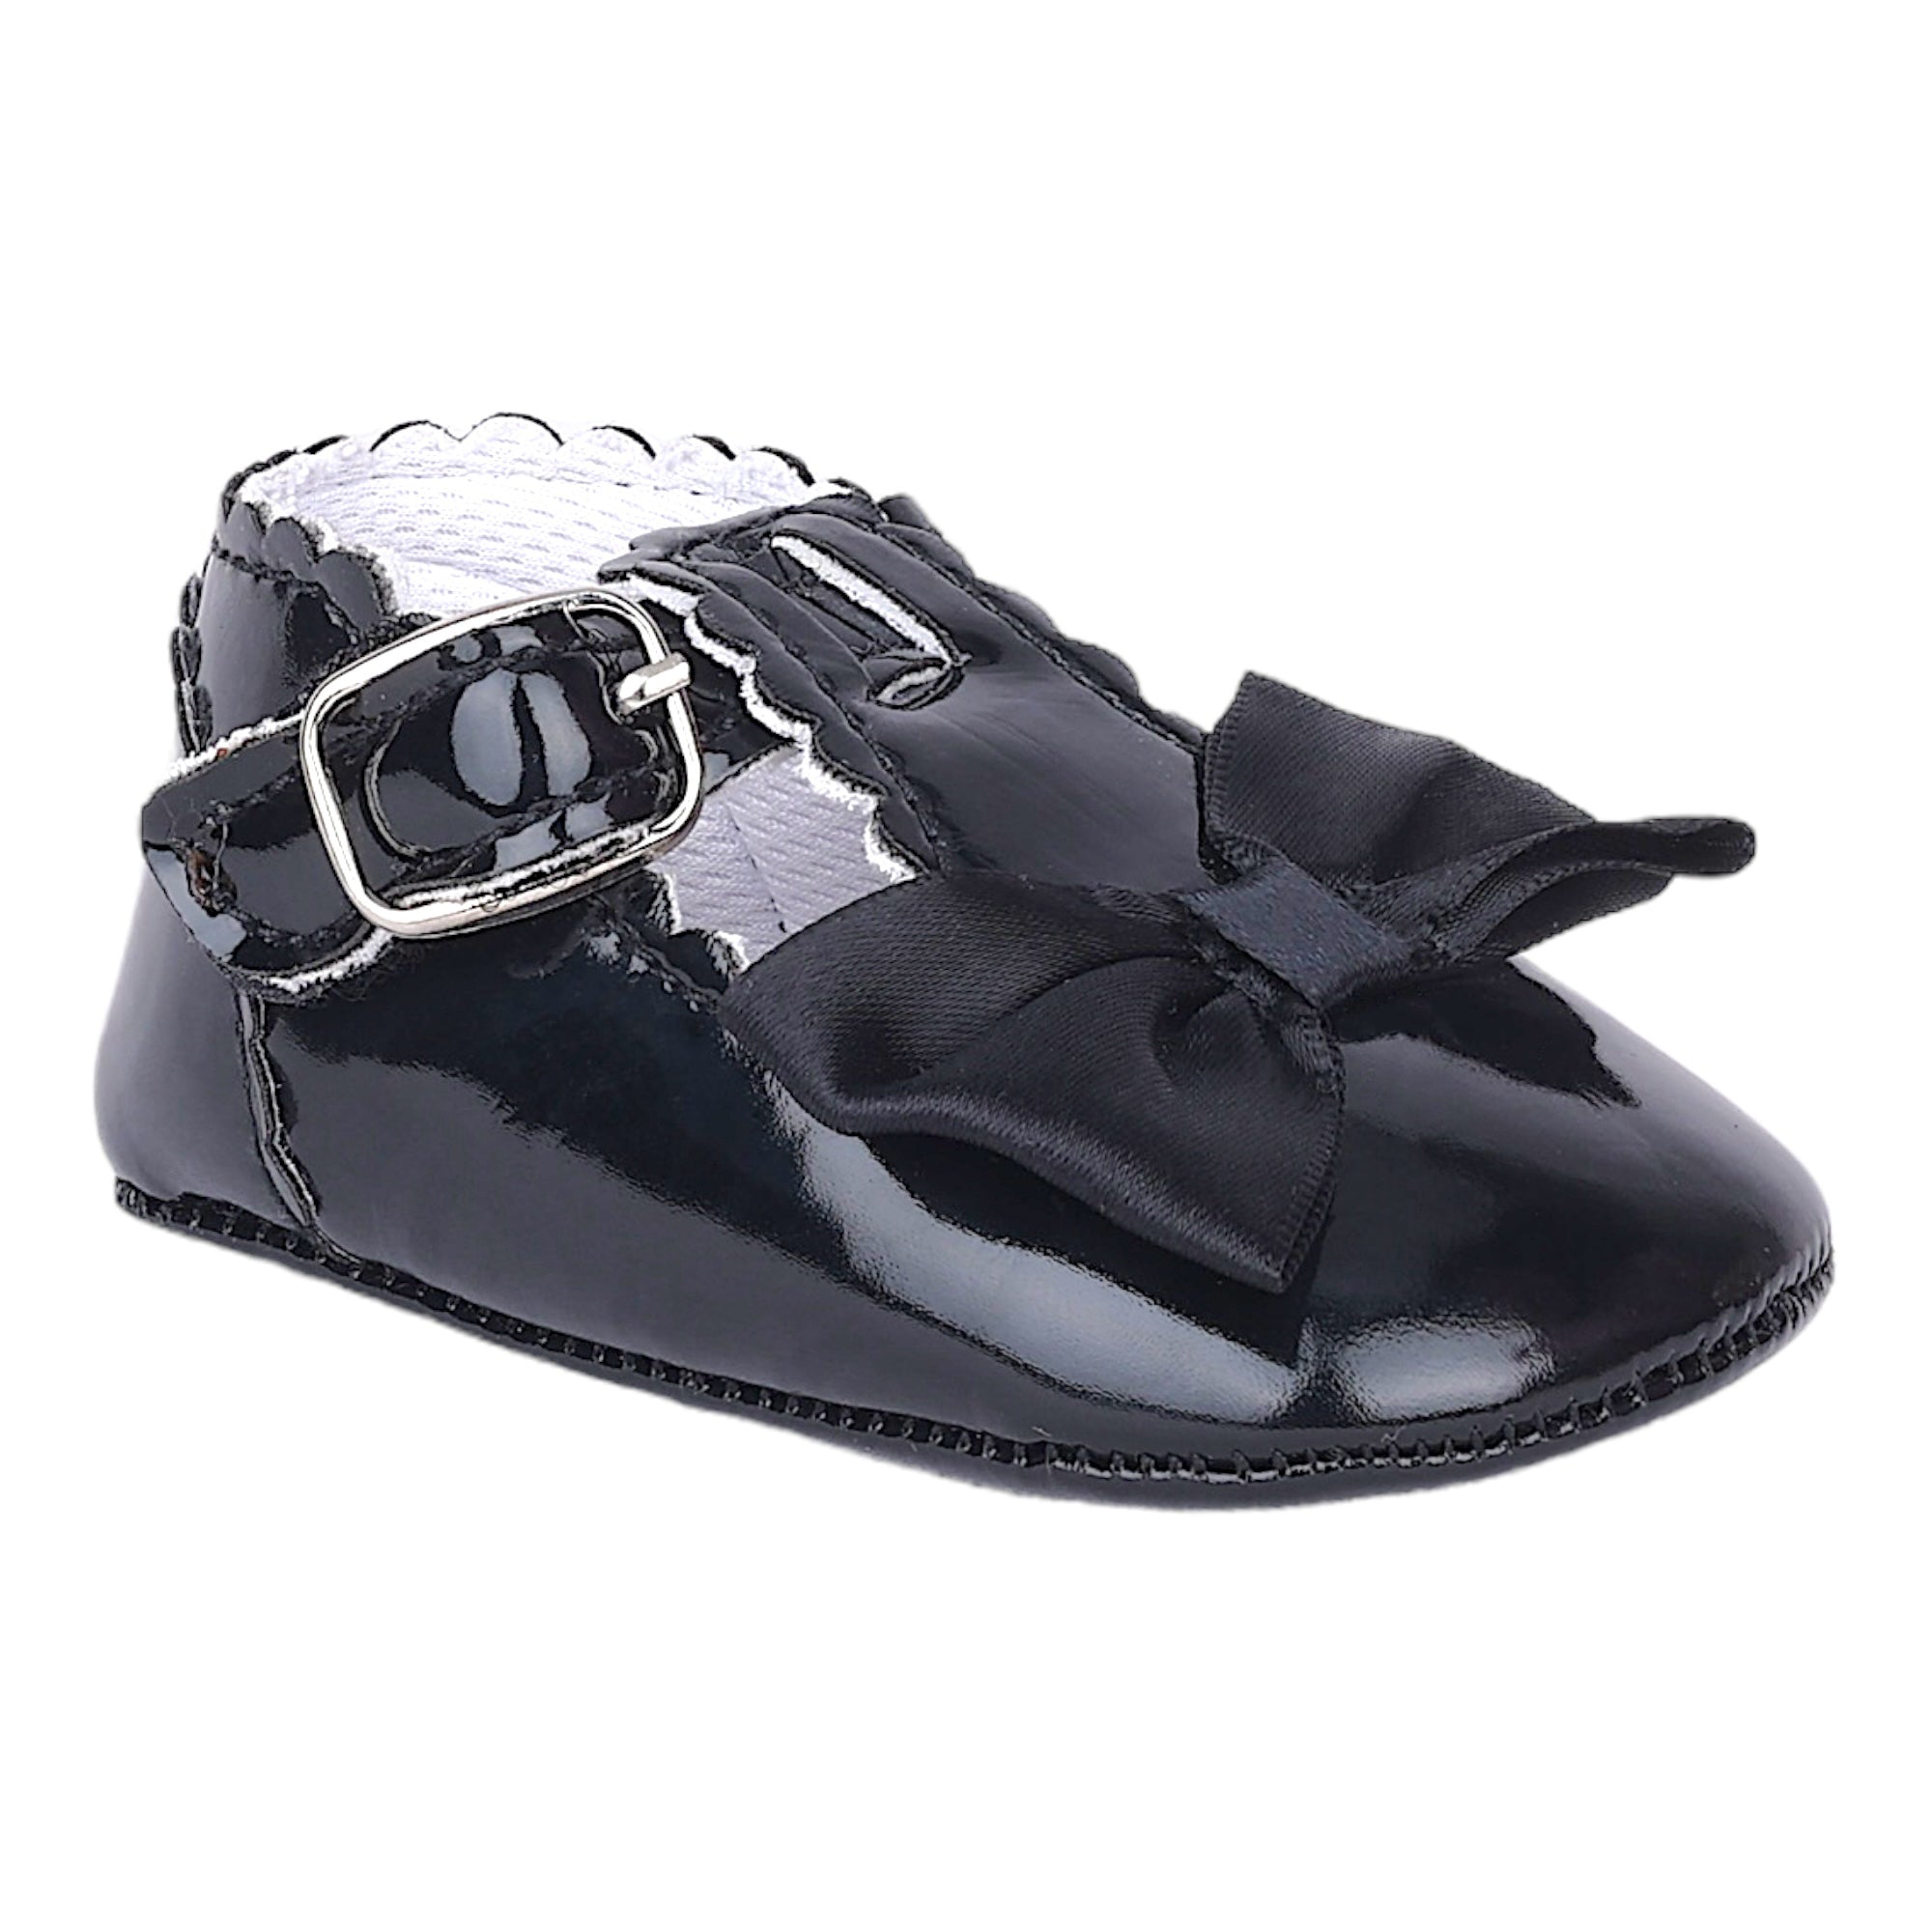 Baby Moo Mary Jane Bow Patent Leather Anti-Skid Ballerina Booties - Black